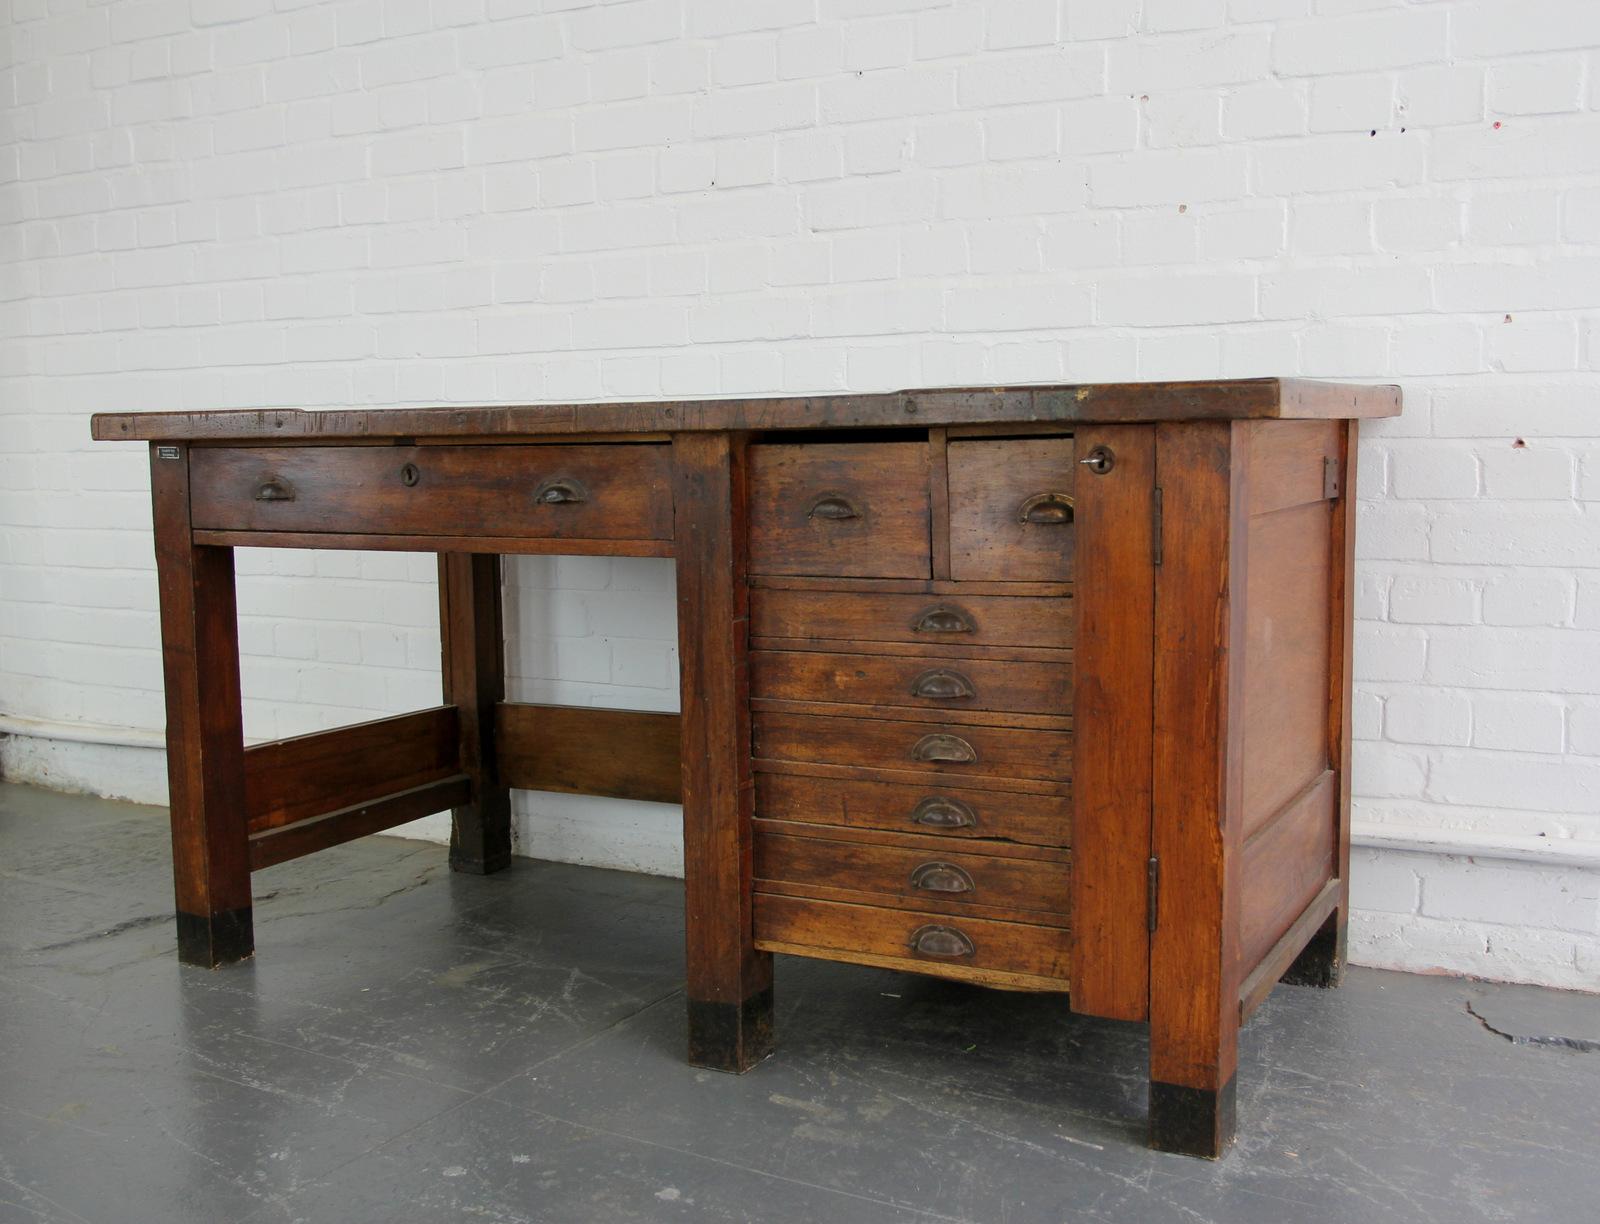 German industrial factory workbench, circa 1930s

- Solid pine
- One large middle drawer
- Five lockable drawers
- Brass cup handles
- Original key
- German, circa 1930s
- Measures: 160cm long x 71cm deep x 79cm tall

Condition